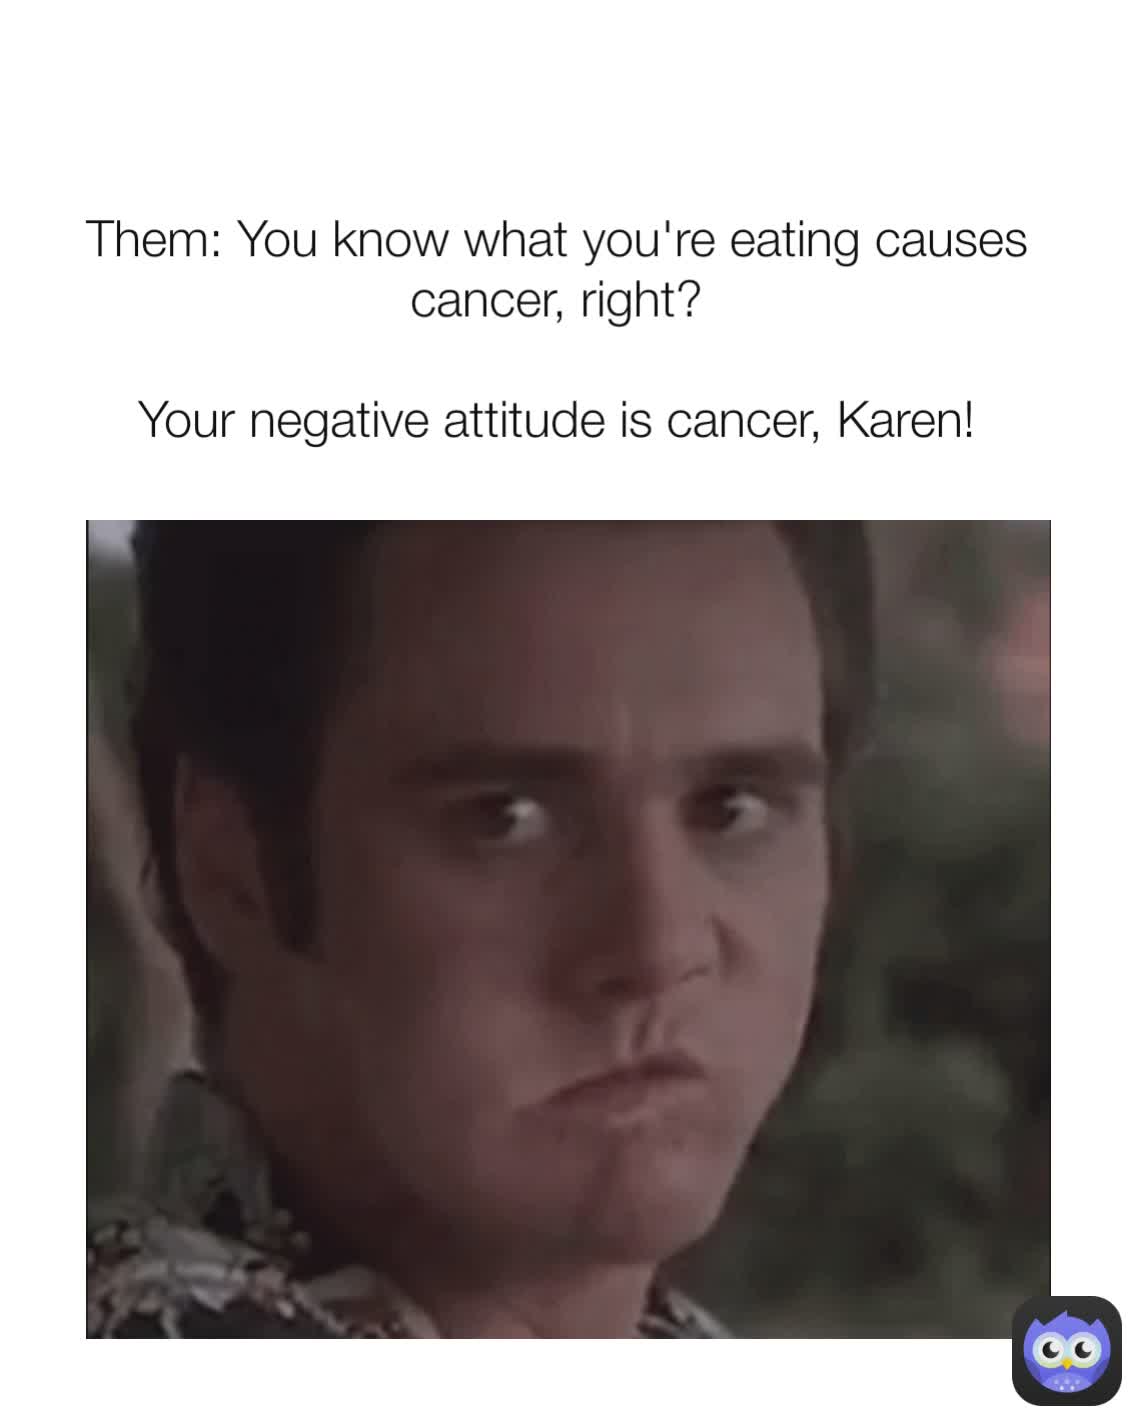 Them: You know what you're eating causes cancer, right?

Your negative attitude is cancer, Karen!